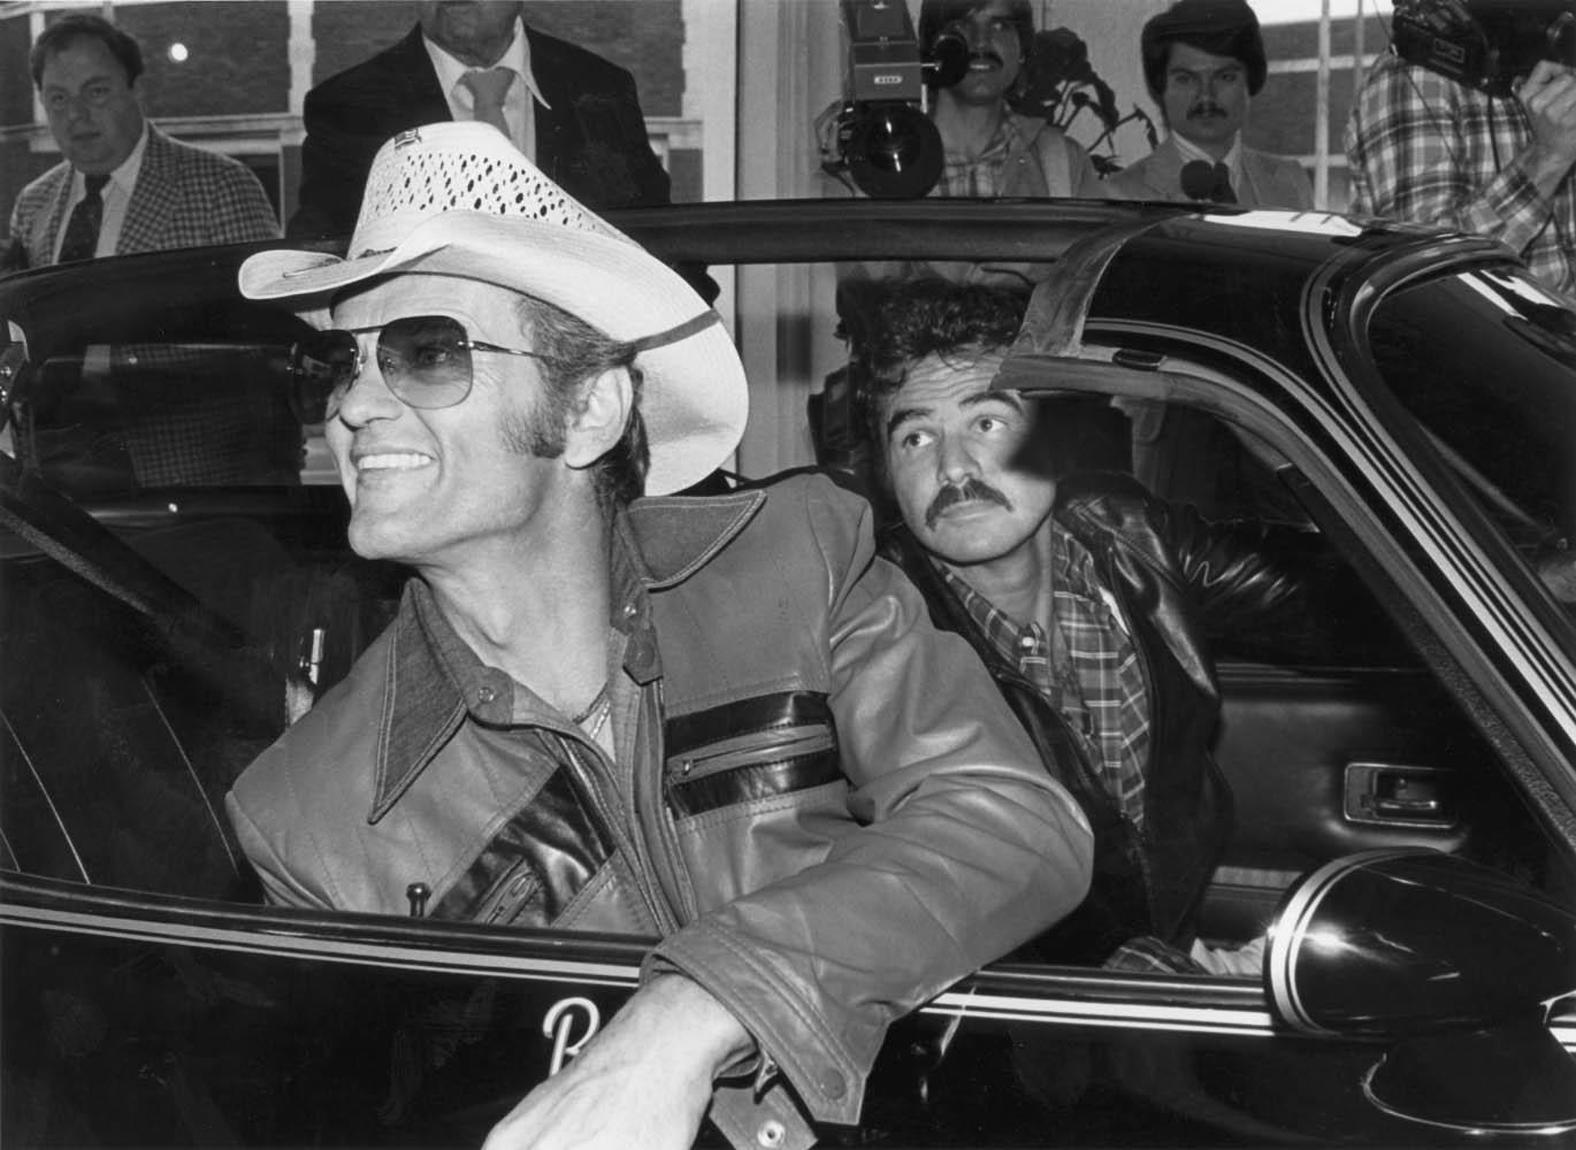 Burt Reynolds Was A Friend To Country Music.